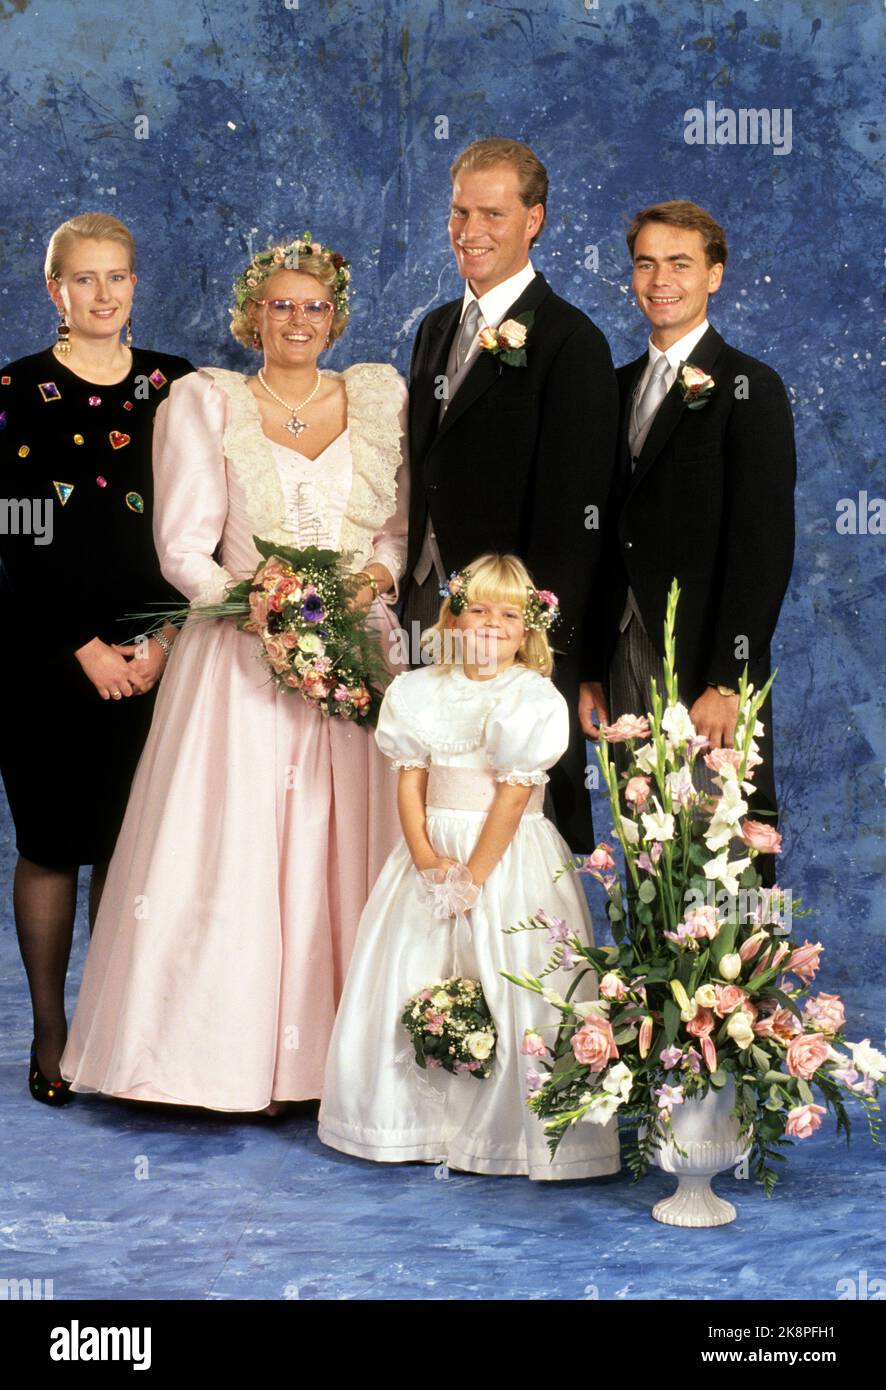 Oslo 19891209: Cathrine Ferner, grandson of King Olav, marries Arild Johansen in Ris church in Oslo. The bride in pink dress with sequins, lace and flower wreath in the hair. Here the bridal couple photographed with the grooms, Benedikte Ferner and Petter Elind. In the picture also the bridal girl, Laila Maria, the groom's 5 And half a year old niece. Photo: Knut Falch Stock Photo